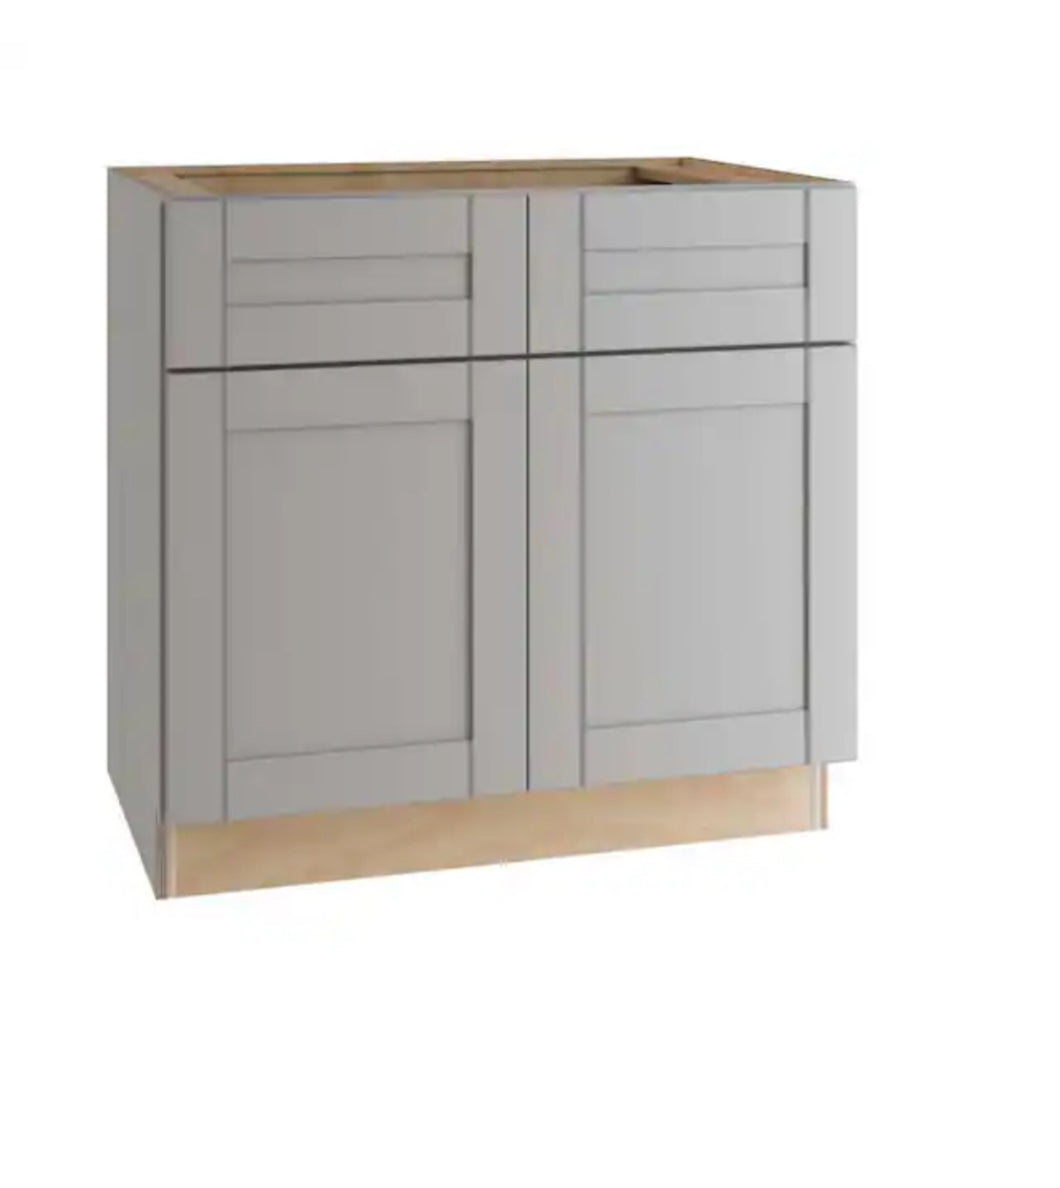 Richmond Vesuvius Gray Plywood Shaker Ready to Assemble Base Kitchen Cabinet Soft Close 30 in W x 24 in D x 34.5 in H